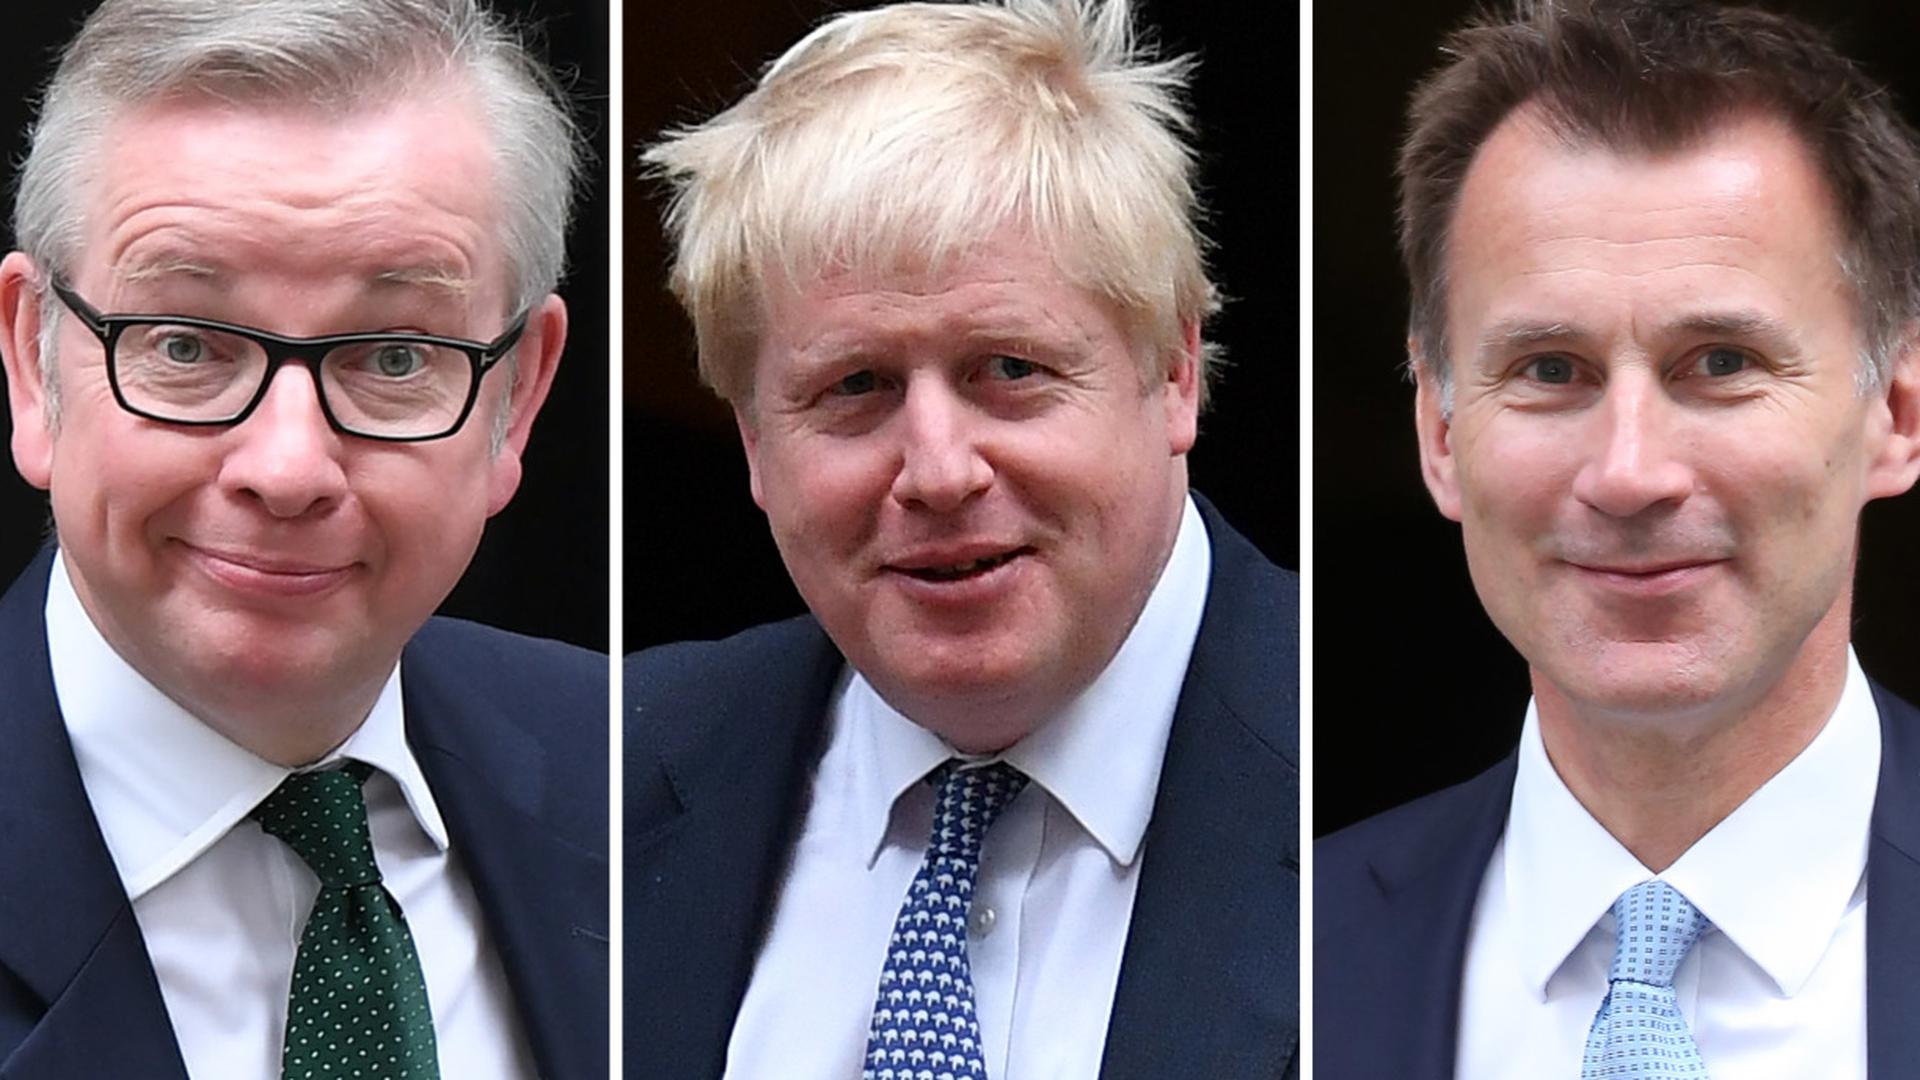 A combination of pictures created in London on June 13, 2019 shows the seven contenders left in the race for leader of the Conservative party after the first round of voting.(L-R) Britain's International Development Secretary Rory Stewart, Former Brexit Secretary Dominic Raab, Britain's Environment, Food and Rural Affairs Secretary Michael Gove, former foreign secretary Boris Johnson, Britain's Foreign Secretary Jeremy Hunt, Britain's Home Secretary Sajid Javid and Britain's Health and Social Care Secretary Matt Hancock. - Boris Johnson overwhelmingly won the first round of voting today in the race to replace outgoing British Prime Minister Theresa May, with the field of candidates narrowed to seven from 10. (Photo by STF / AFP)